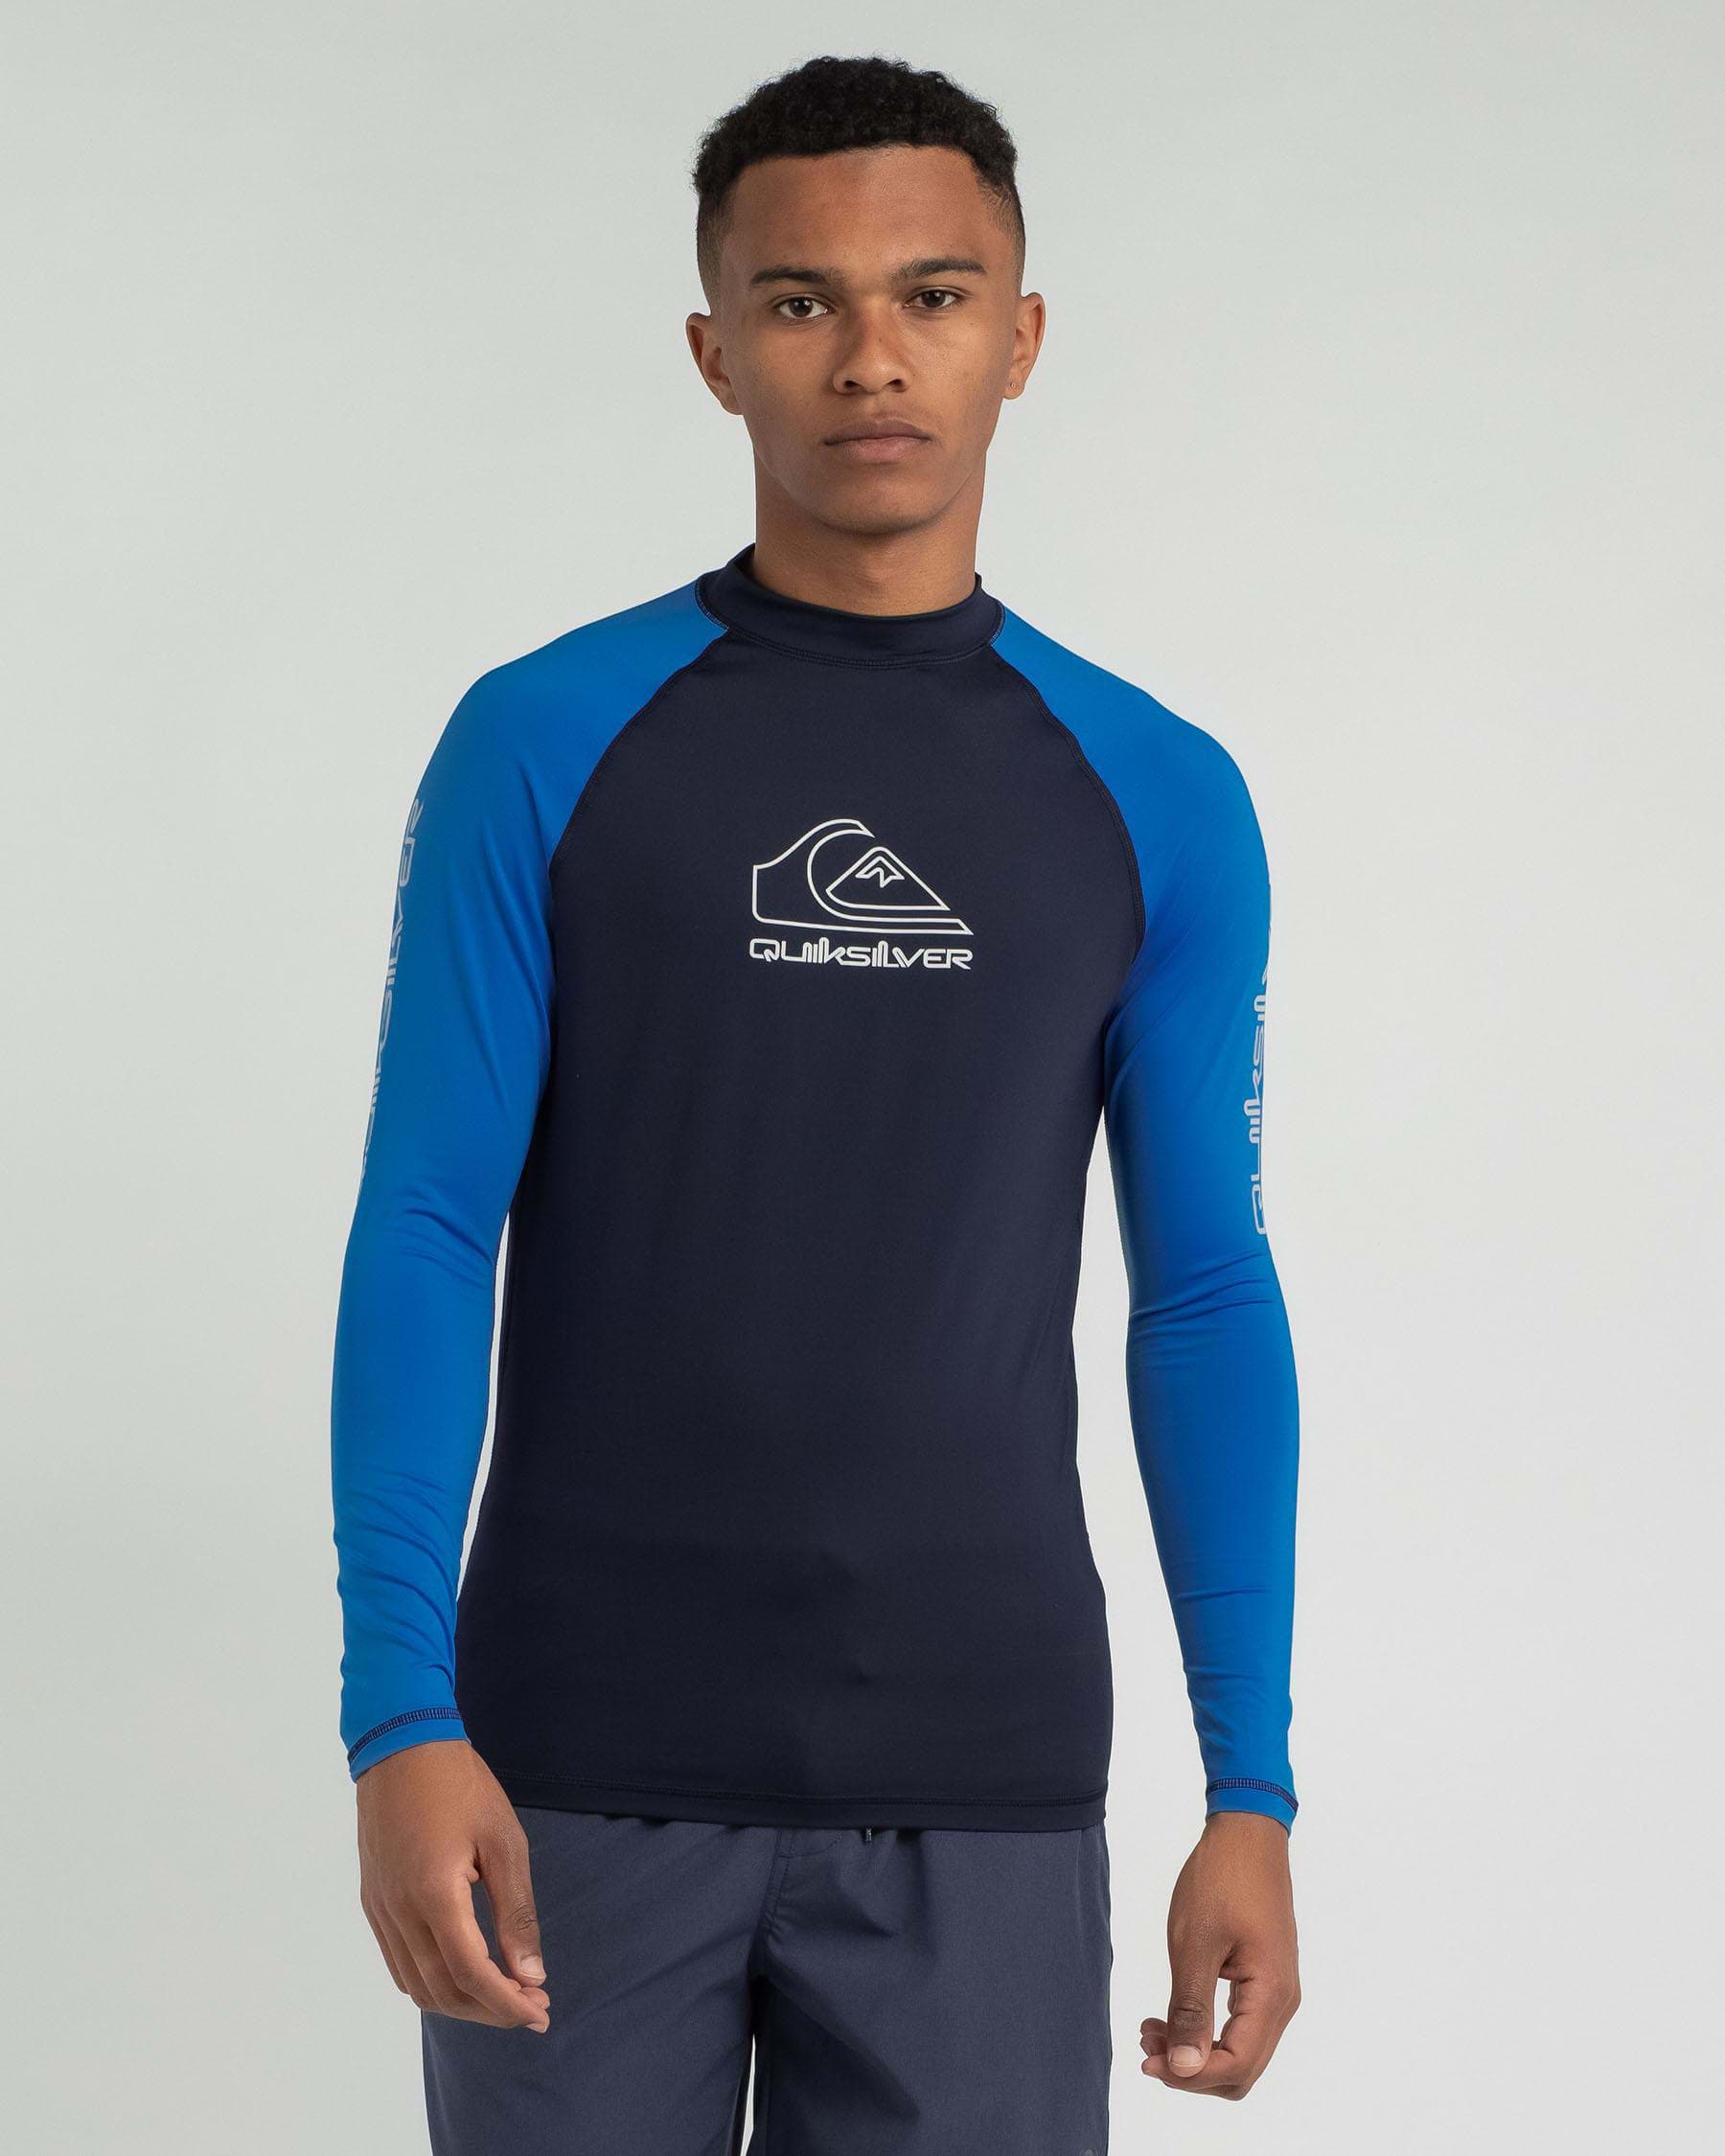 Quiksilver On Tour Long Sleeve Rash Vest In Navy Blazer - Fast Shipping ...